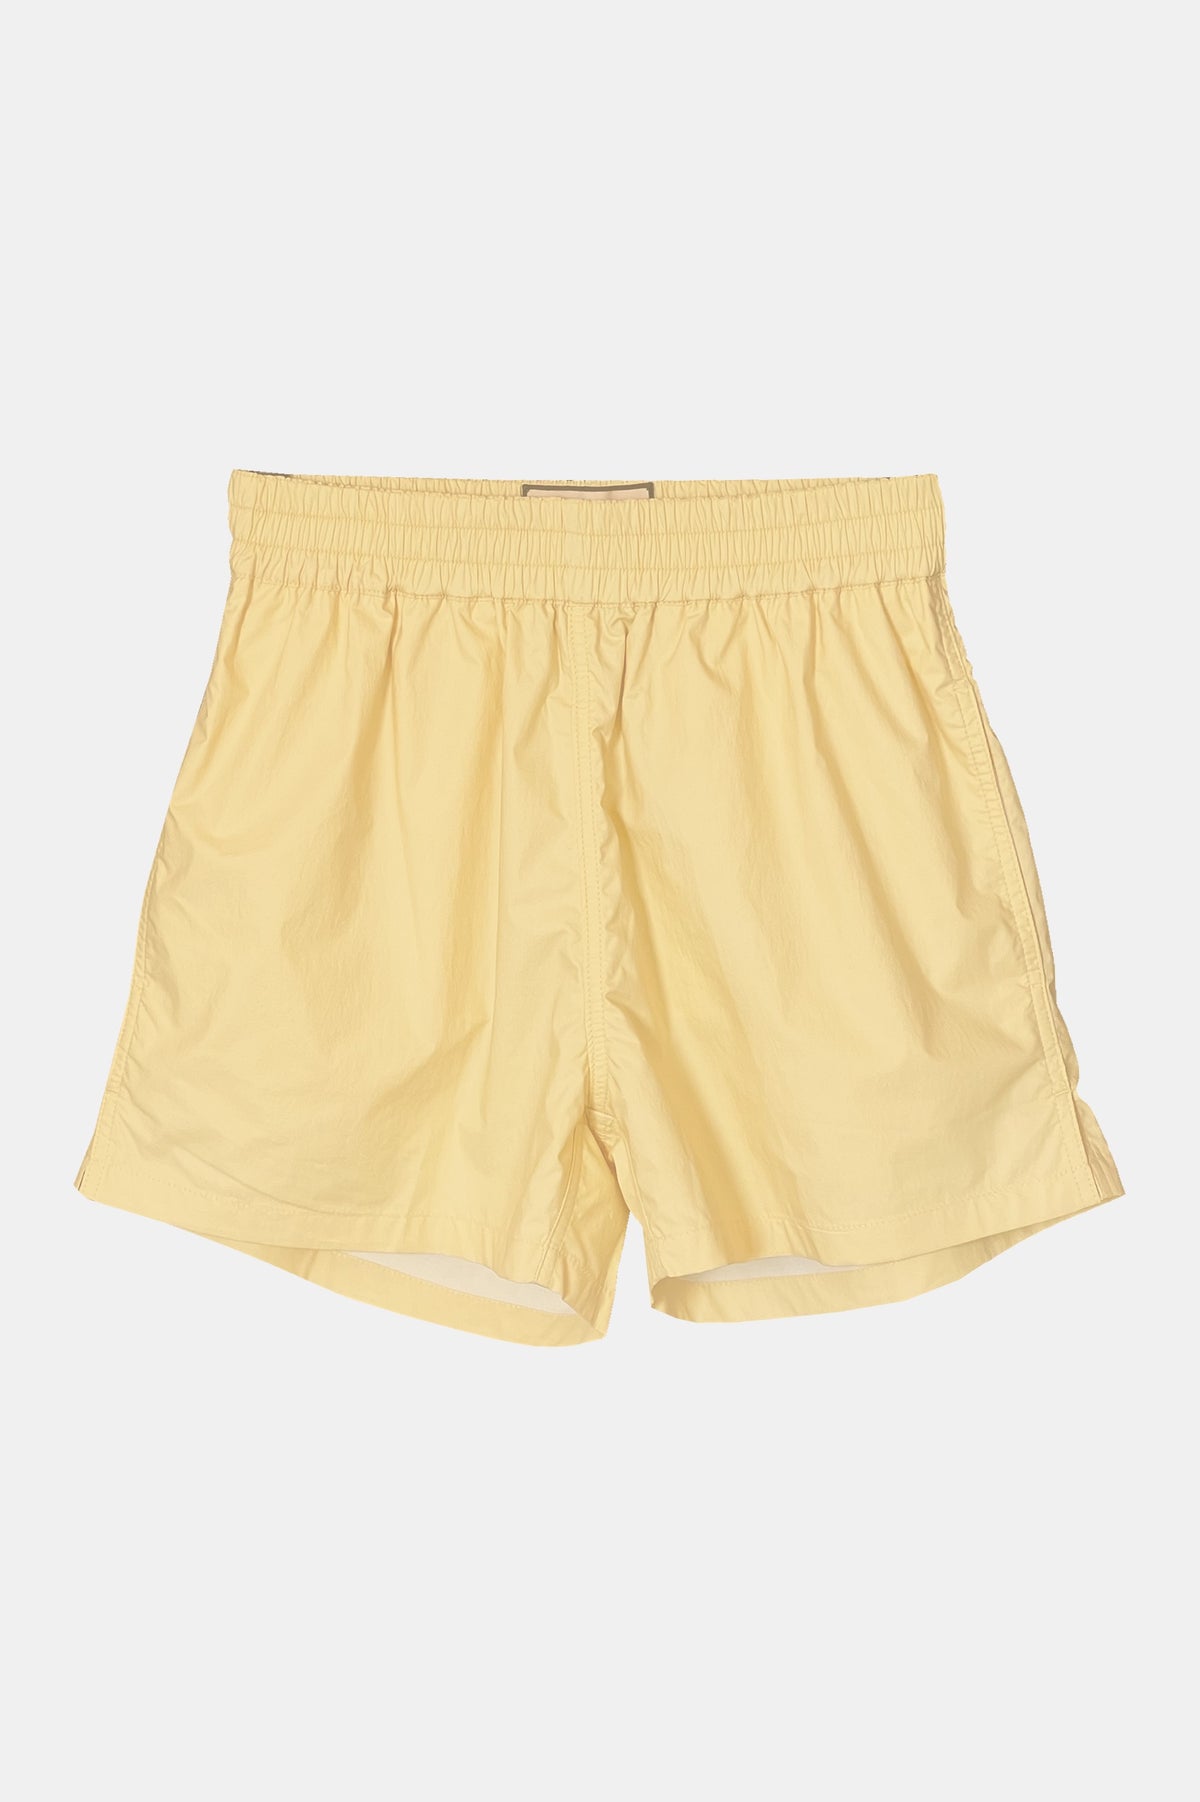 Shorts in Butter